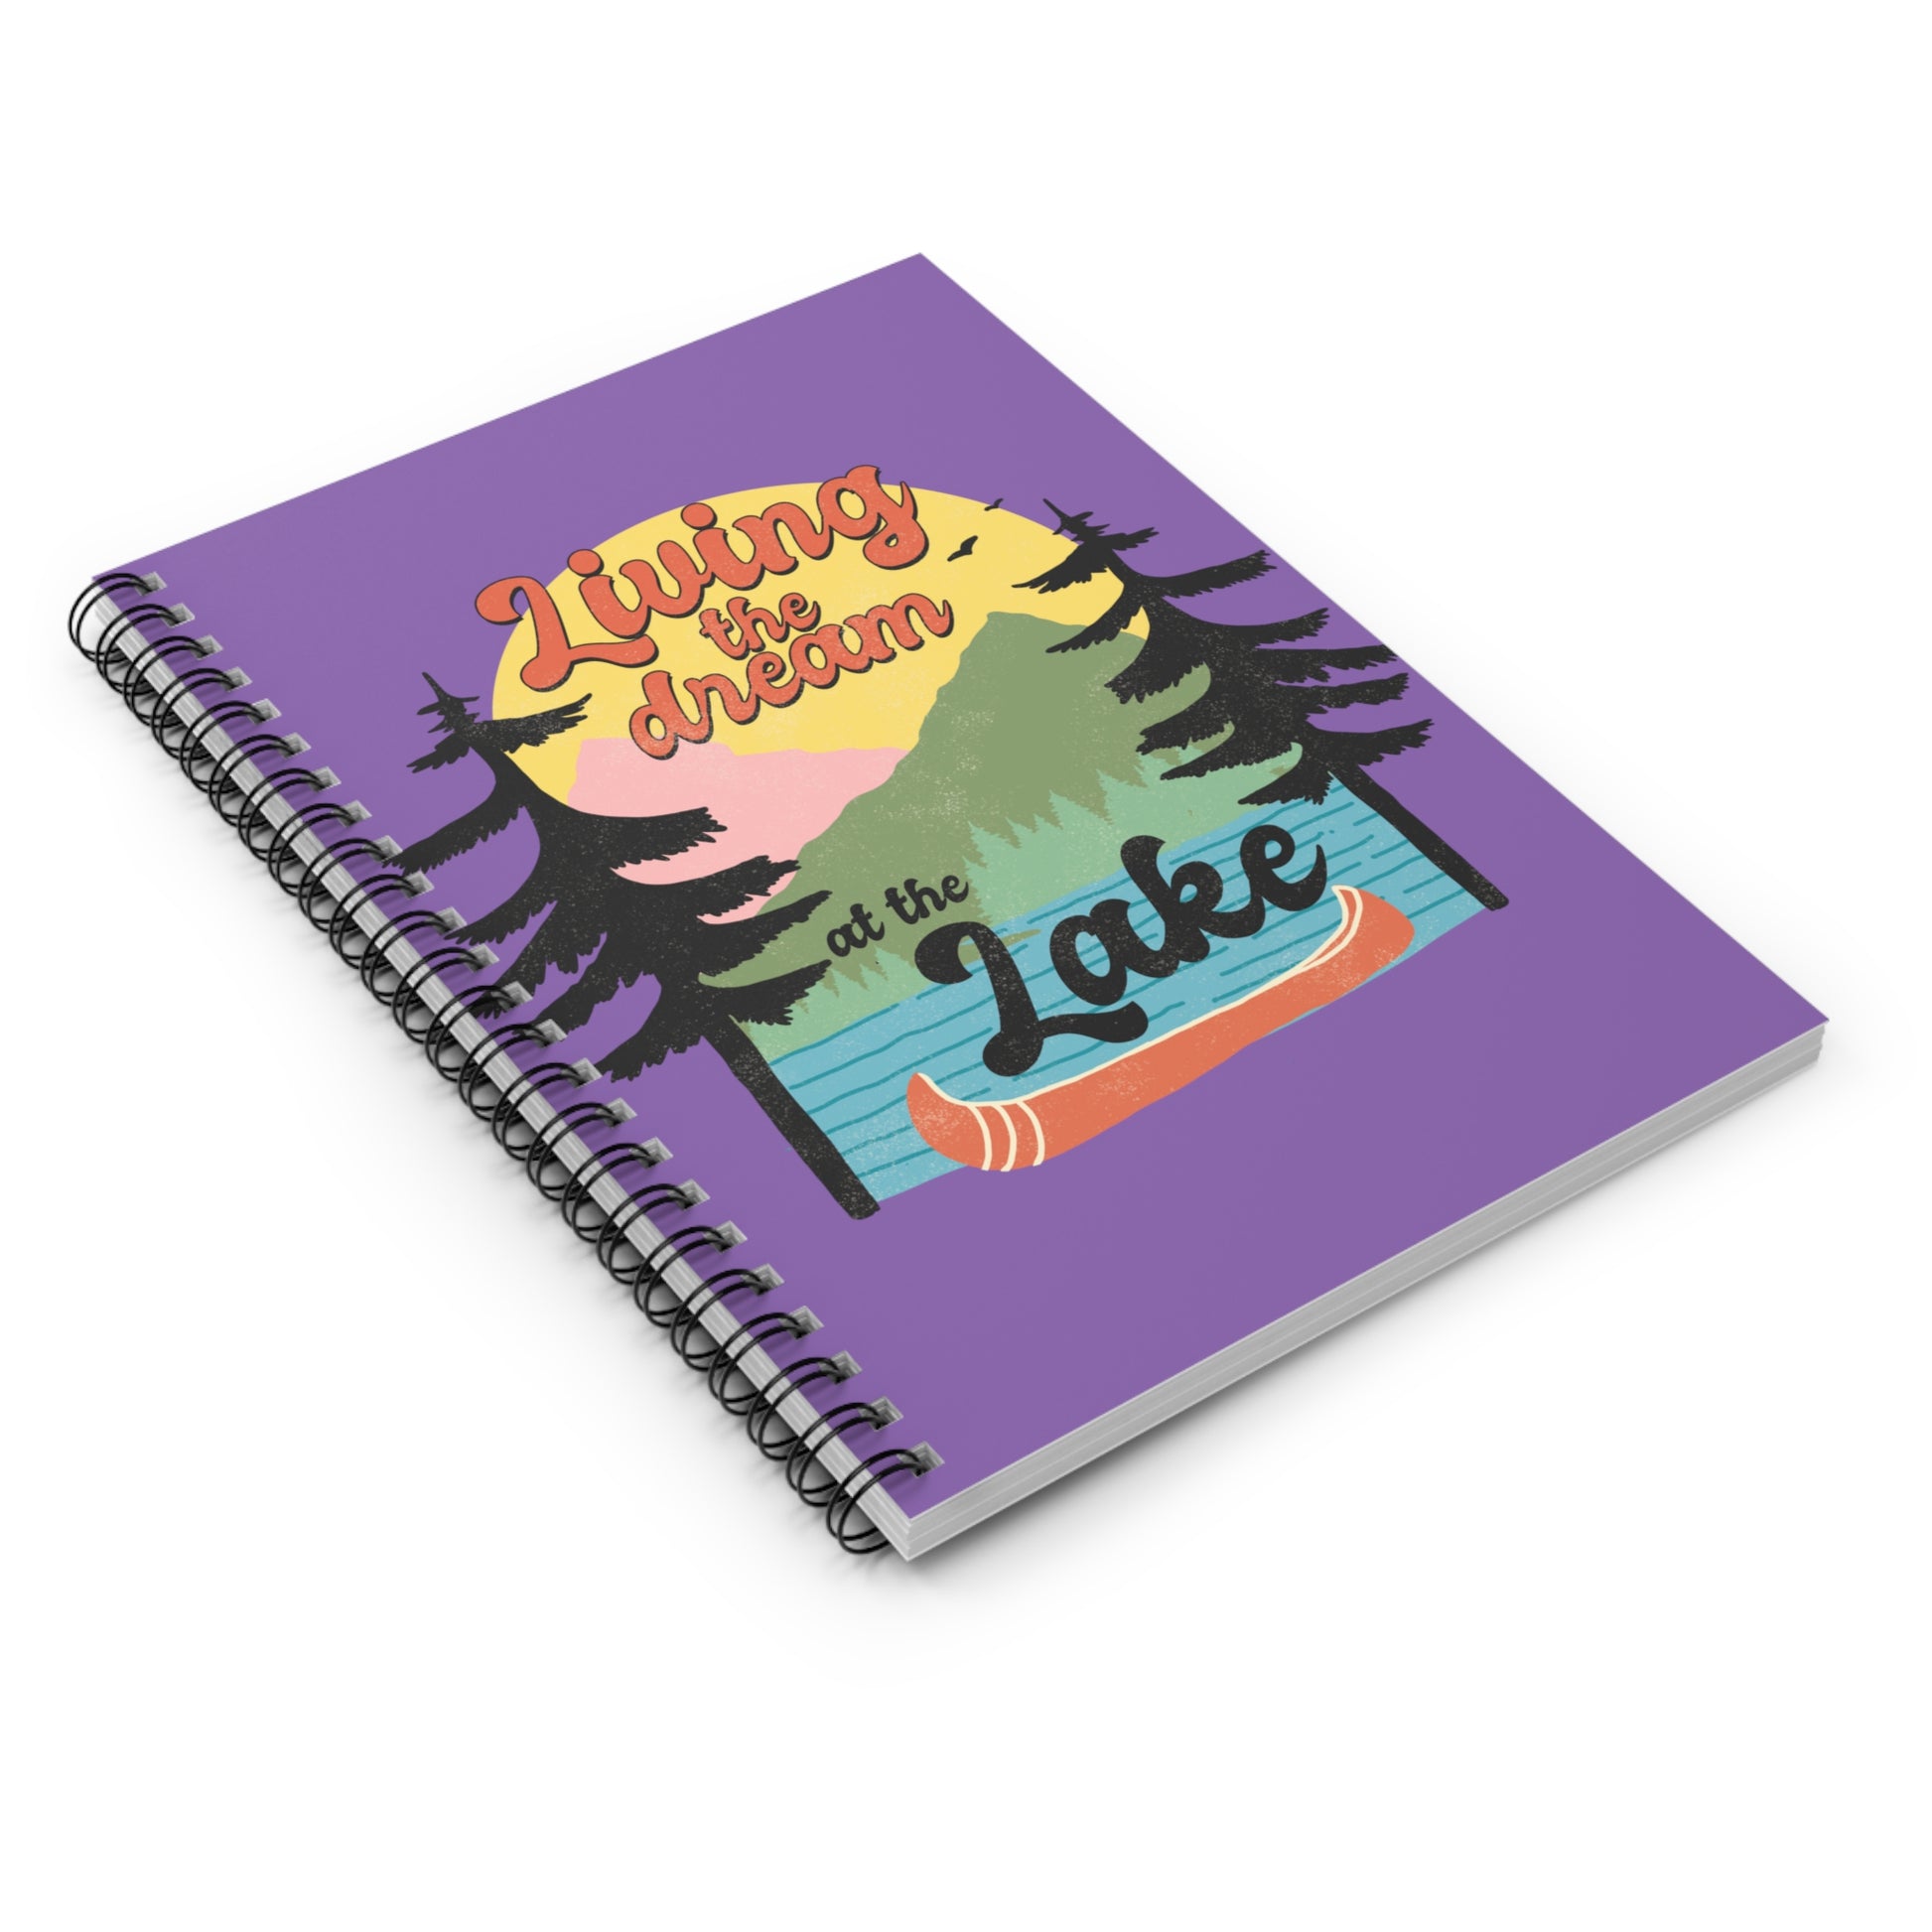 Living the Dream: Spiral Notebook - Log Books - Journals - Diaries - and More Custom Printed by TheGlassyLass